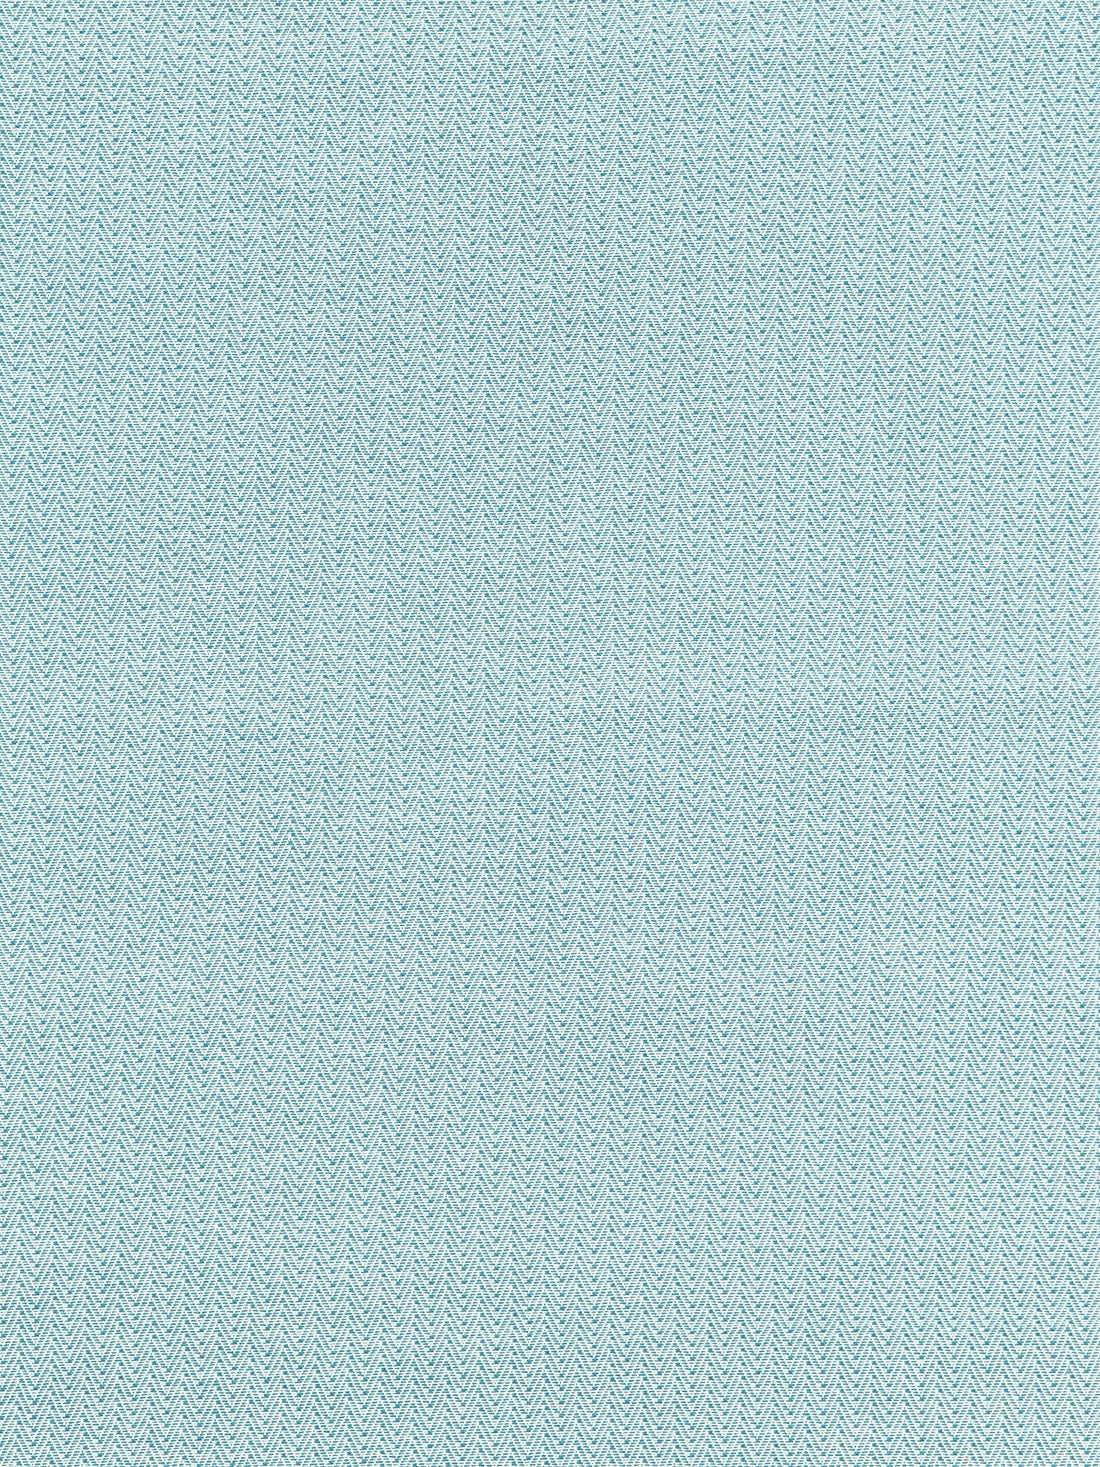 Capri Herringbone fabric in turquoise color - pattern number SC 000327191 - by Scalamandre in the Scalamandre Fabrics Book 1 collection